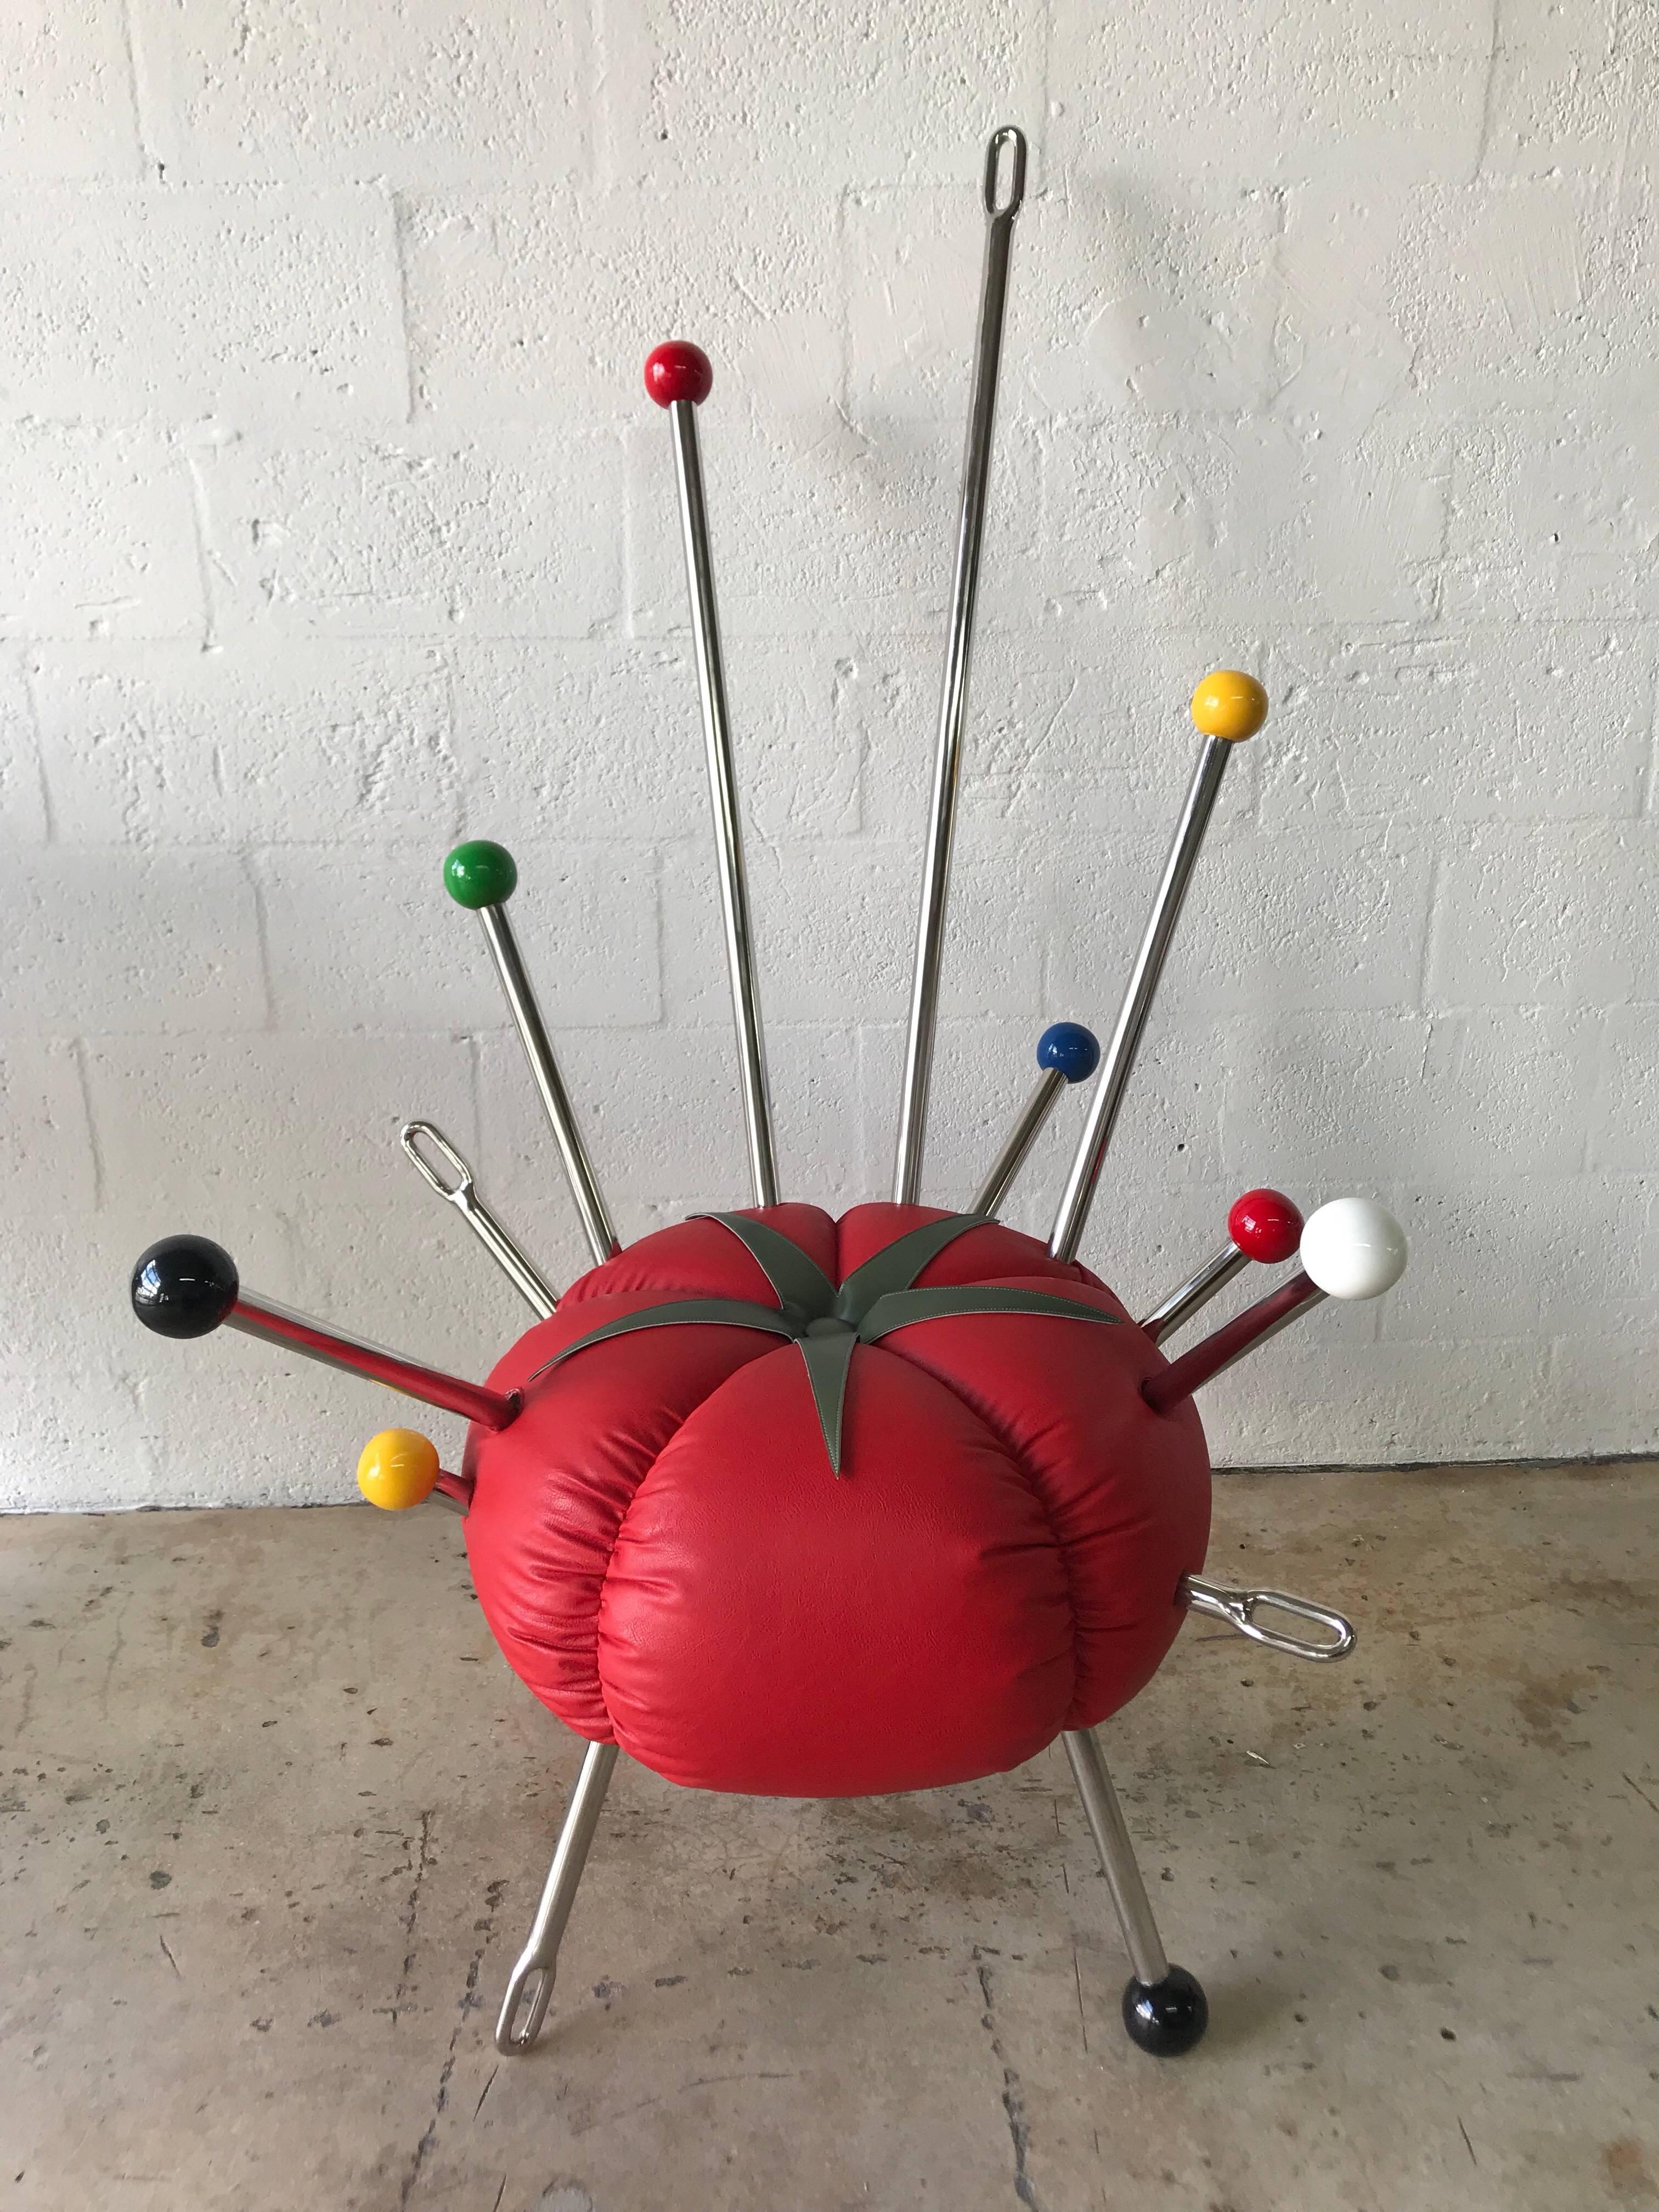 A nostalgic design piece by John Paul Duray, the Tomato chair is designed as a life size chair form of the classic tomato pin cushion.  Rendered in steel, foam, and leather upholstery, this piece can be ordered in custom leather options.  Please